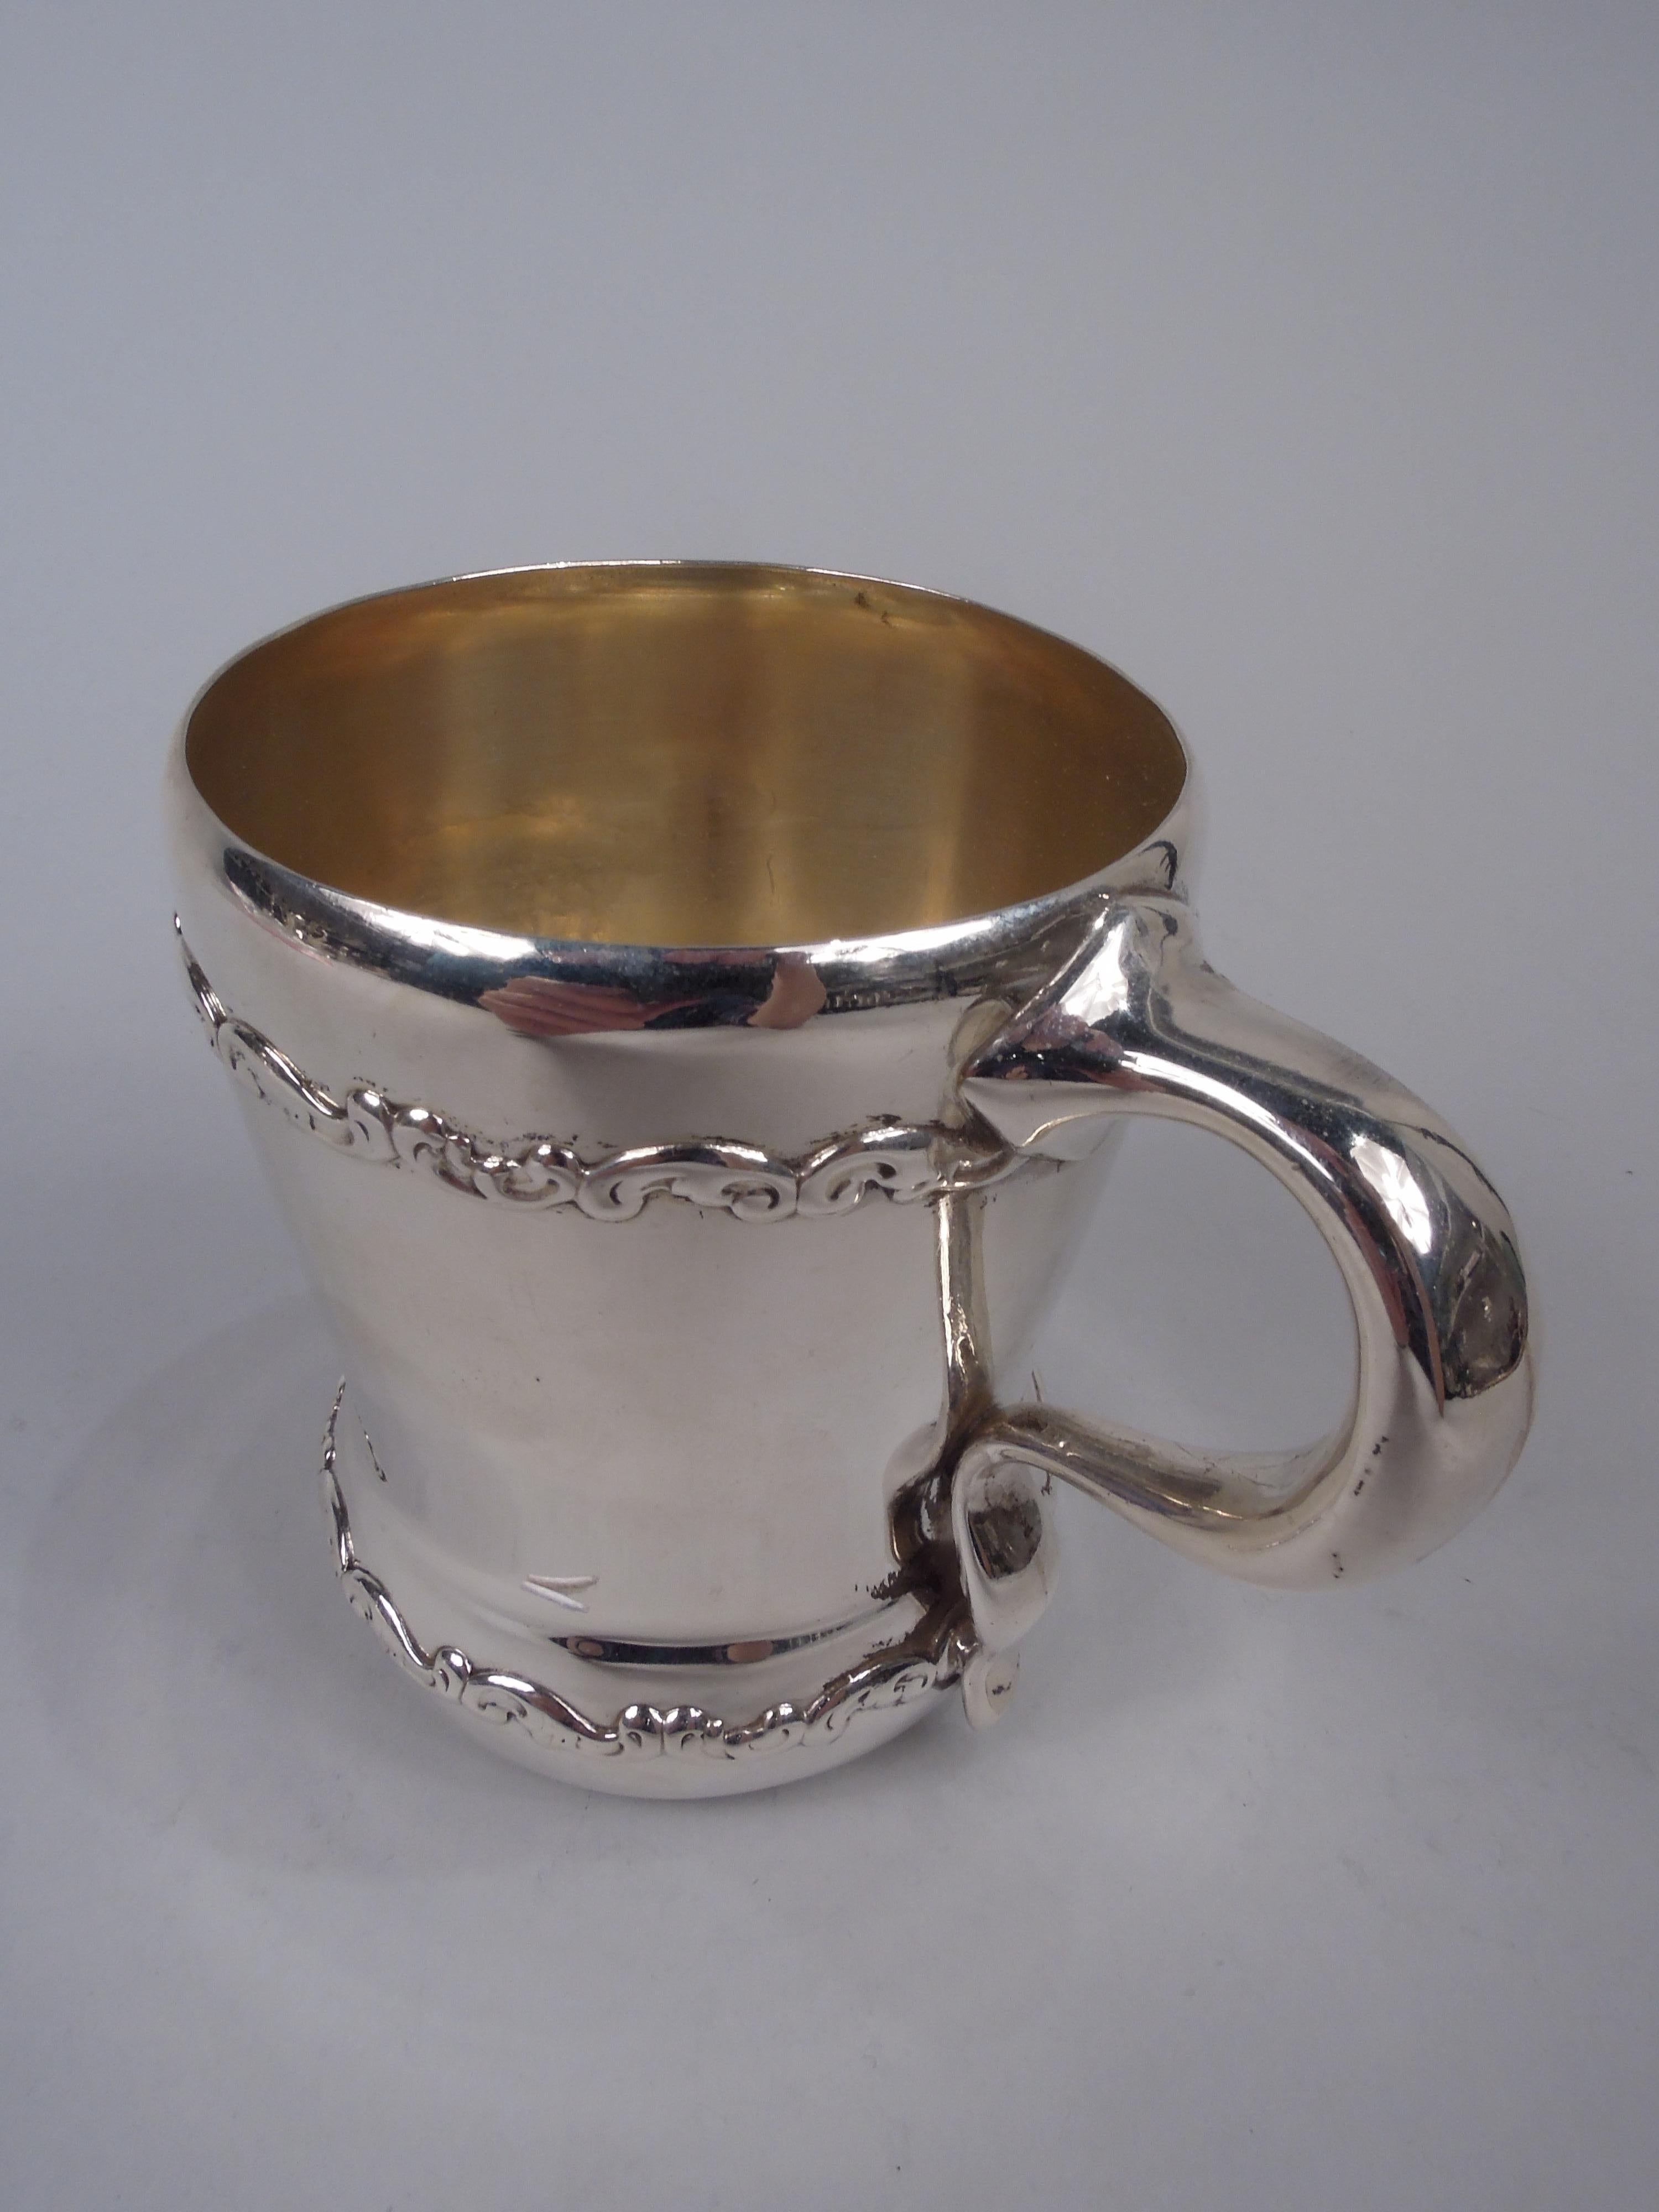 Edwardian Classical sterling silver baby cup. Made by Whiting in New York, ca 1910. Tapering sides, curved rim, and bellied bowl; c-scroll handle with scrolled tail. Two scrolled bands applied to top and bottom. Gilt-washed interior. Plenty of room